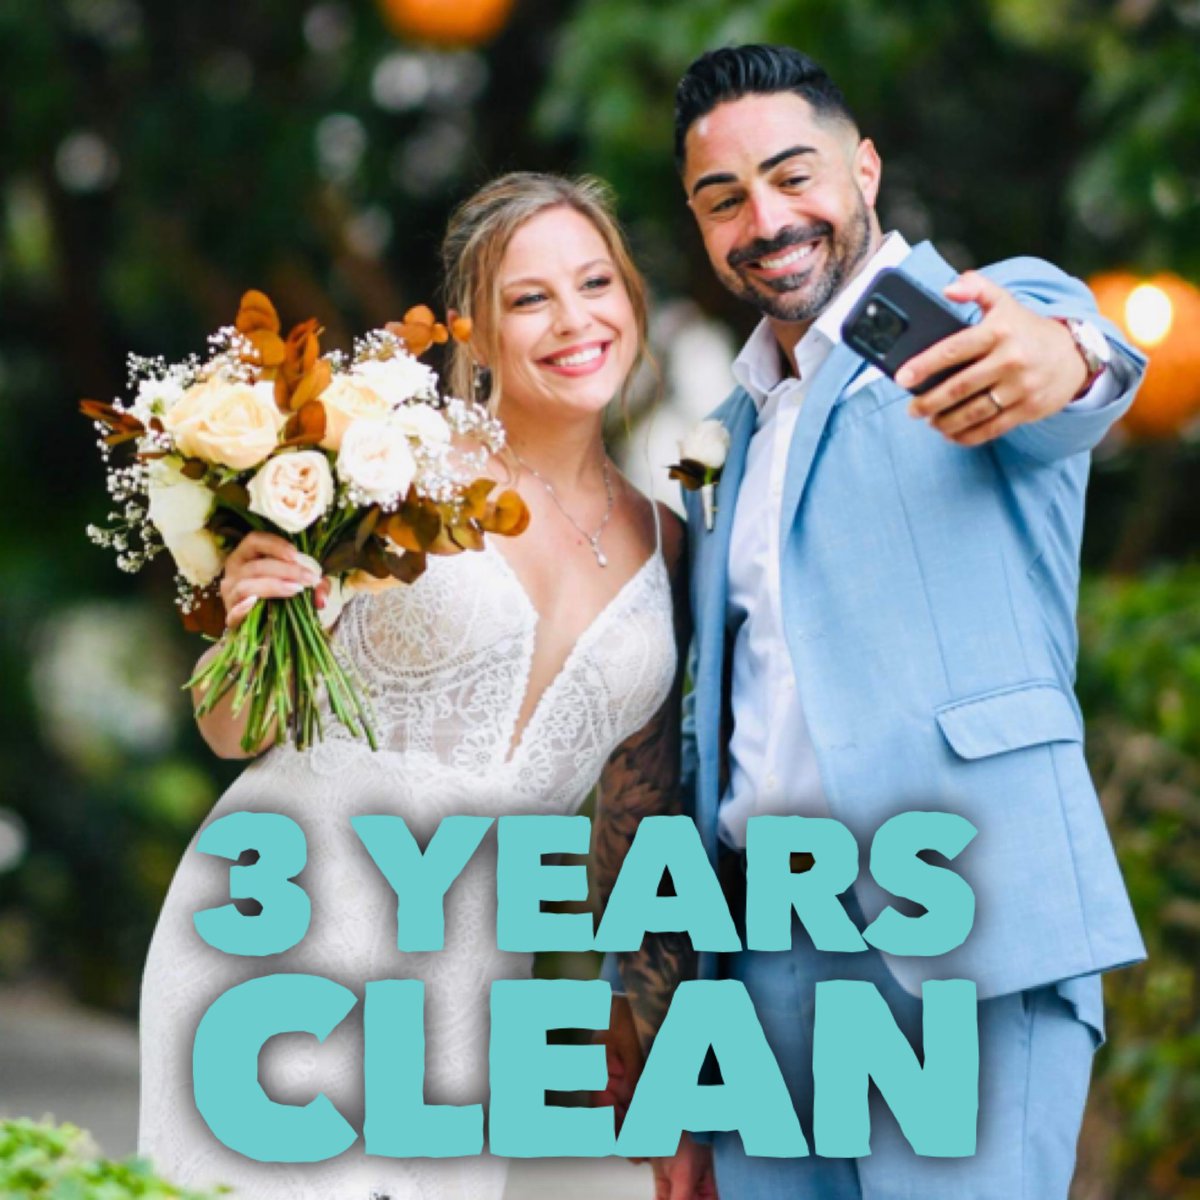 Congratulations Alumni Joe on your 3 YEARS CLEAN !! Look at those smiles. 👇 This is recovery, love, family, life! Enjoy an amazing future you worked so hard for. #WeDoRecover #NewWestRecovery